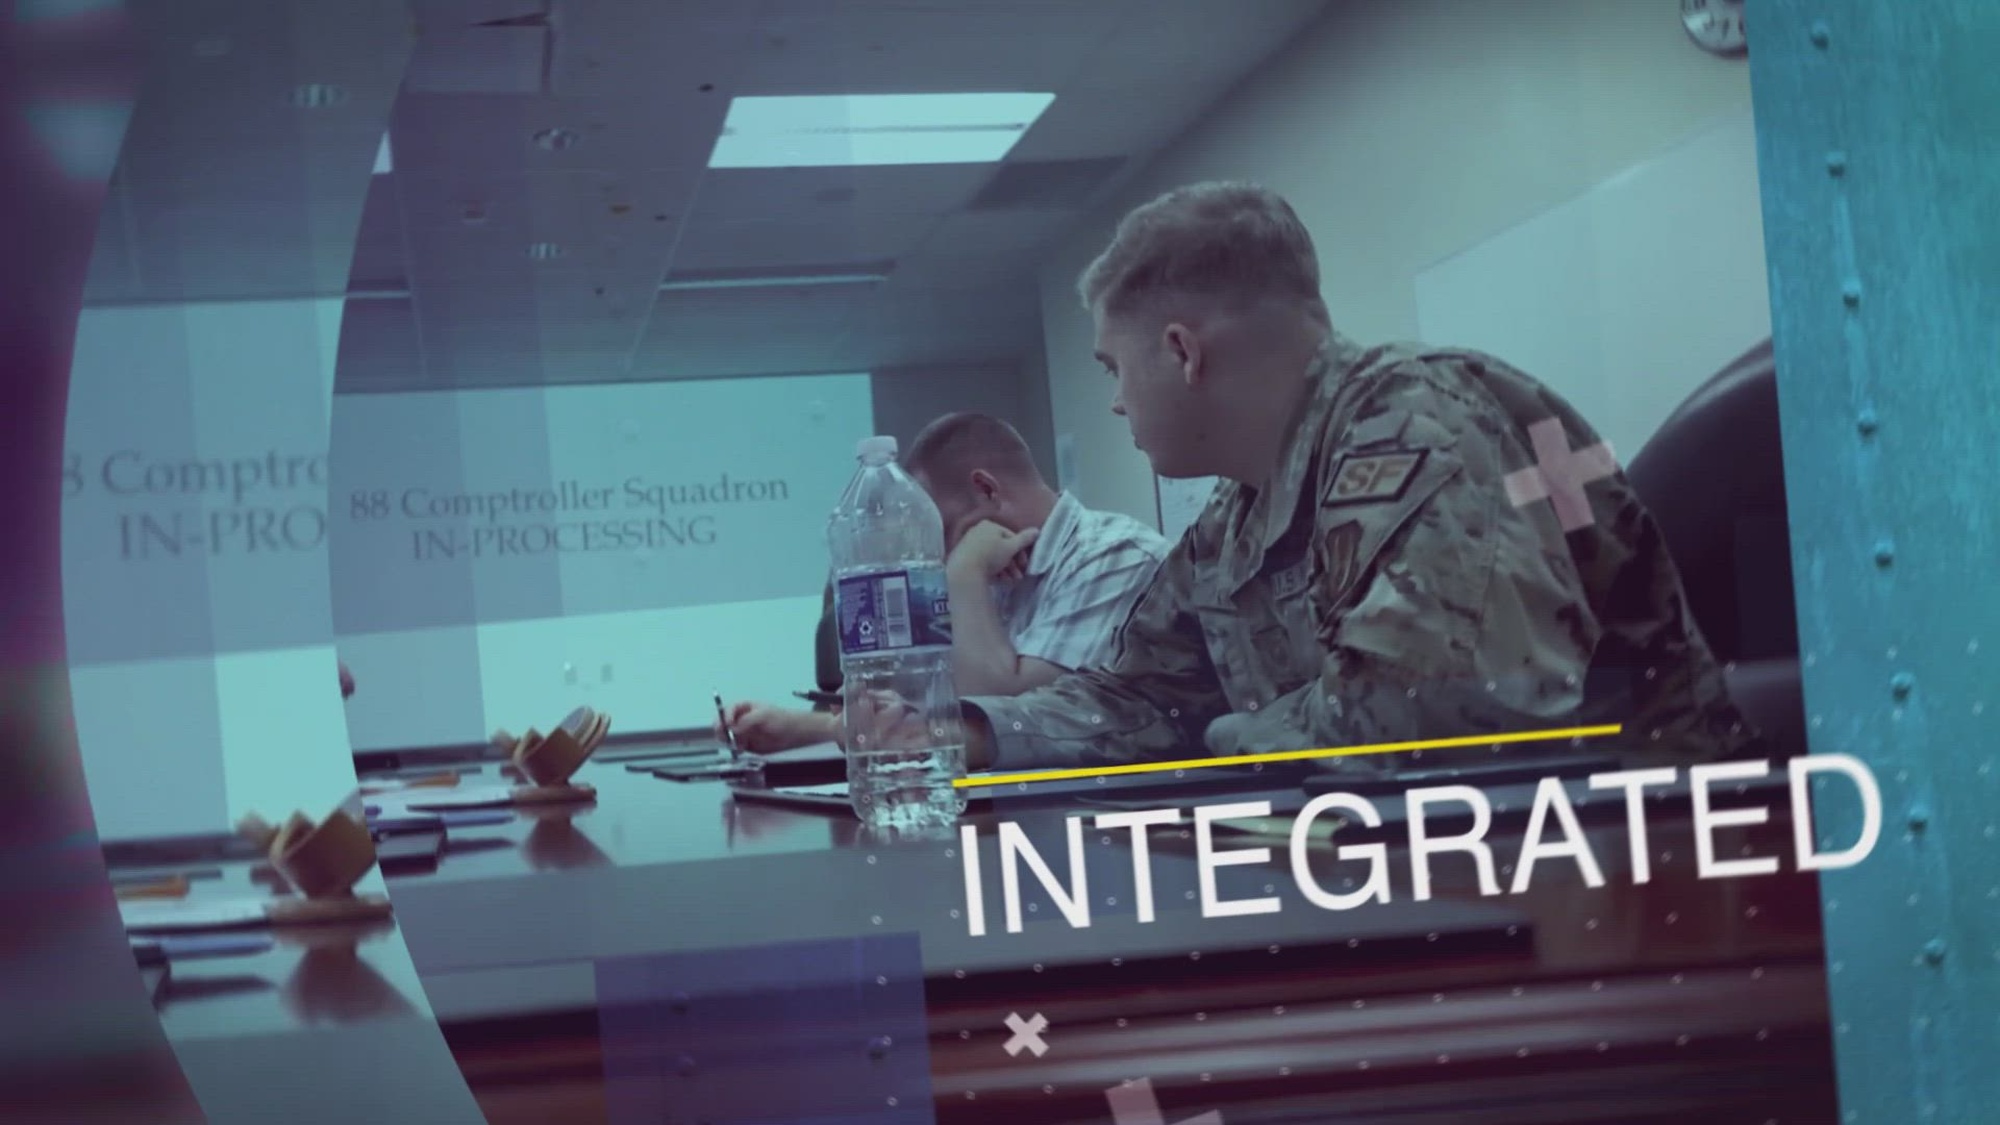 The Air Force Materiel Command Vision: One AFMC--Integrated, collaborative, innovative, trusted and empowered...indispensable to our Nation, disruptive to our adversaries. (U.S. Air Force video by Chris Decker)